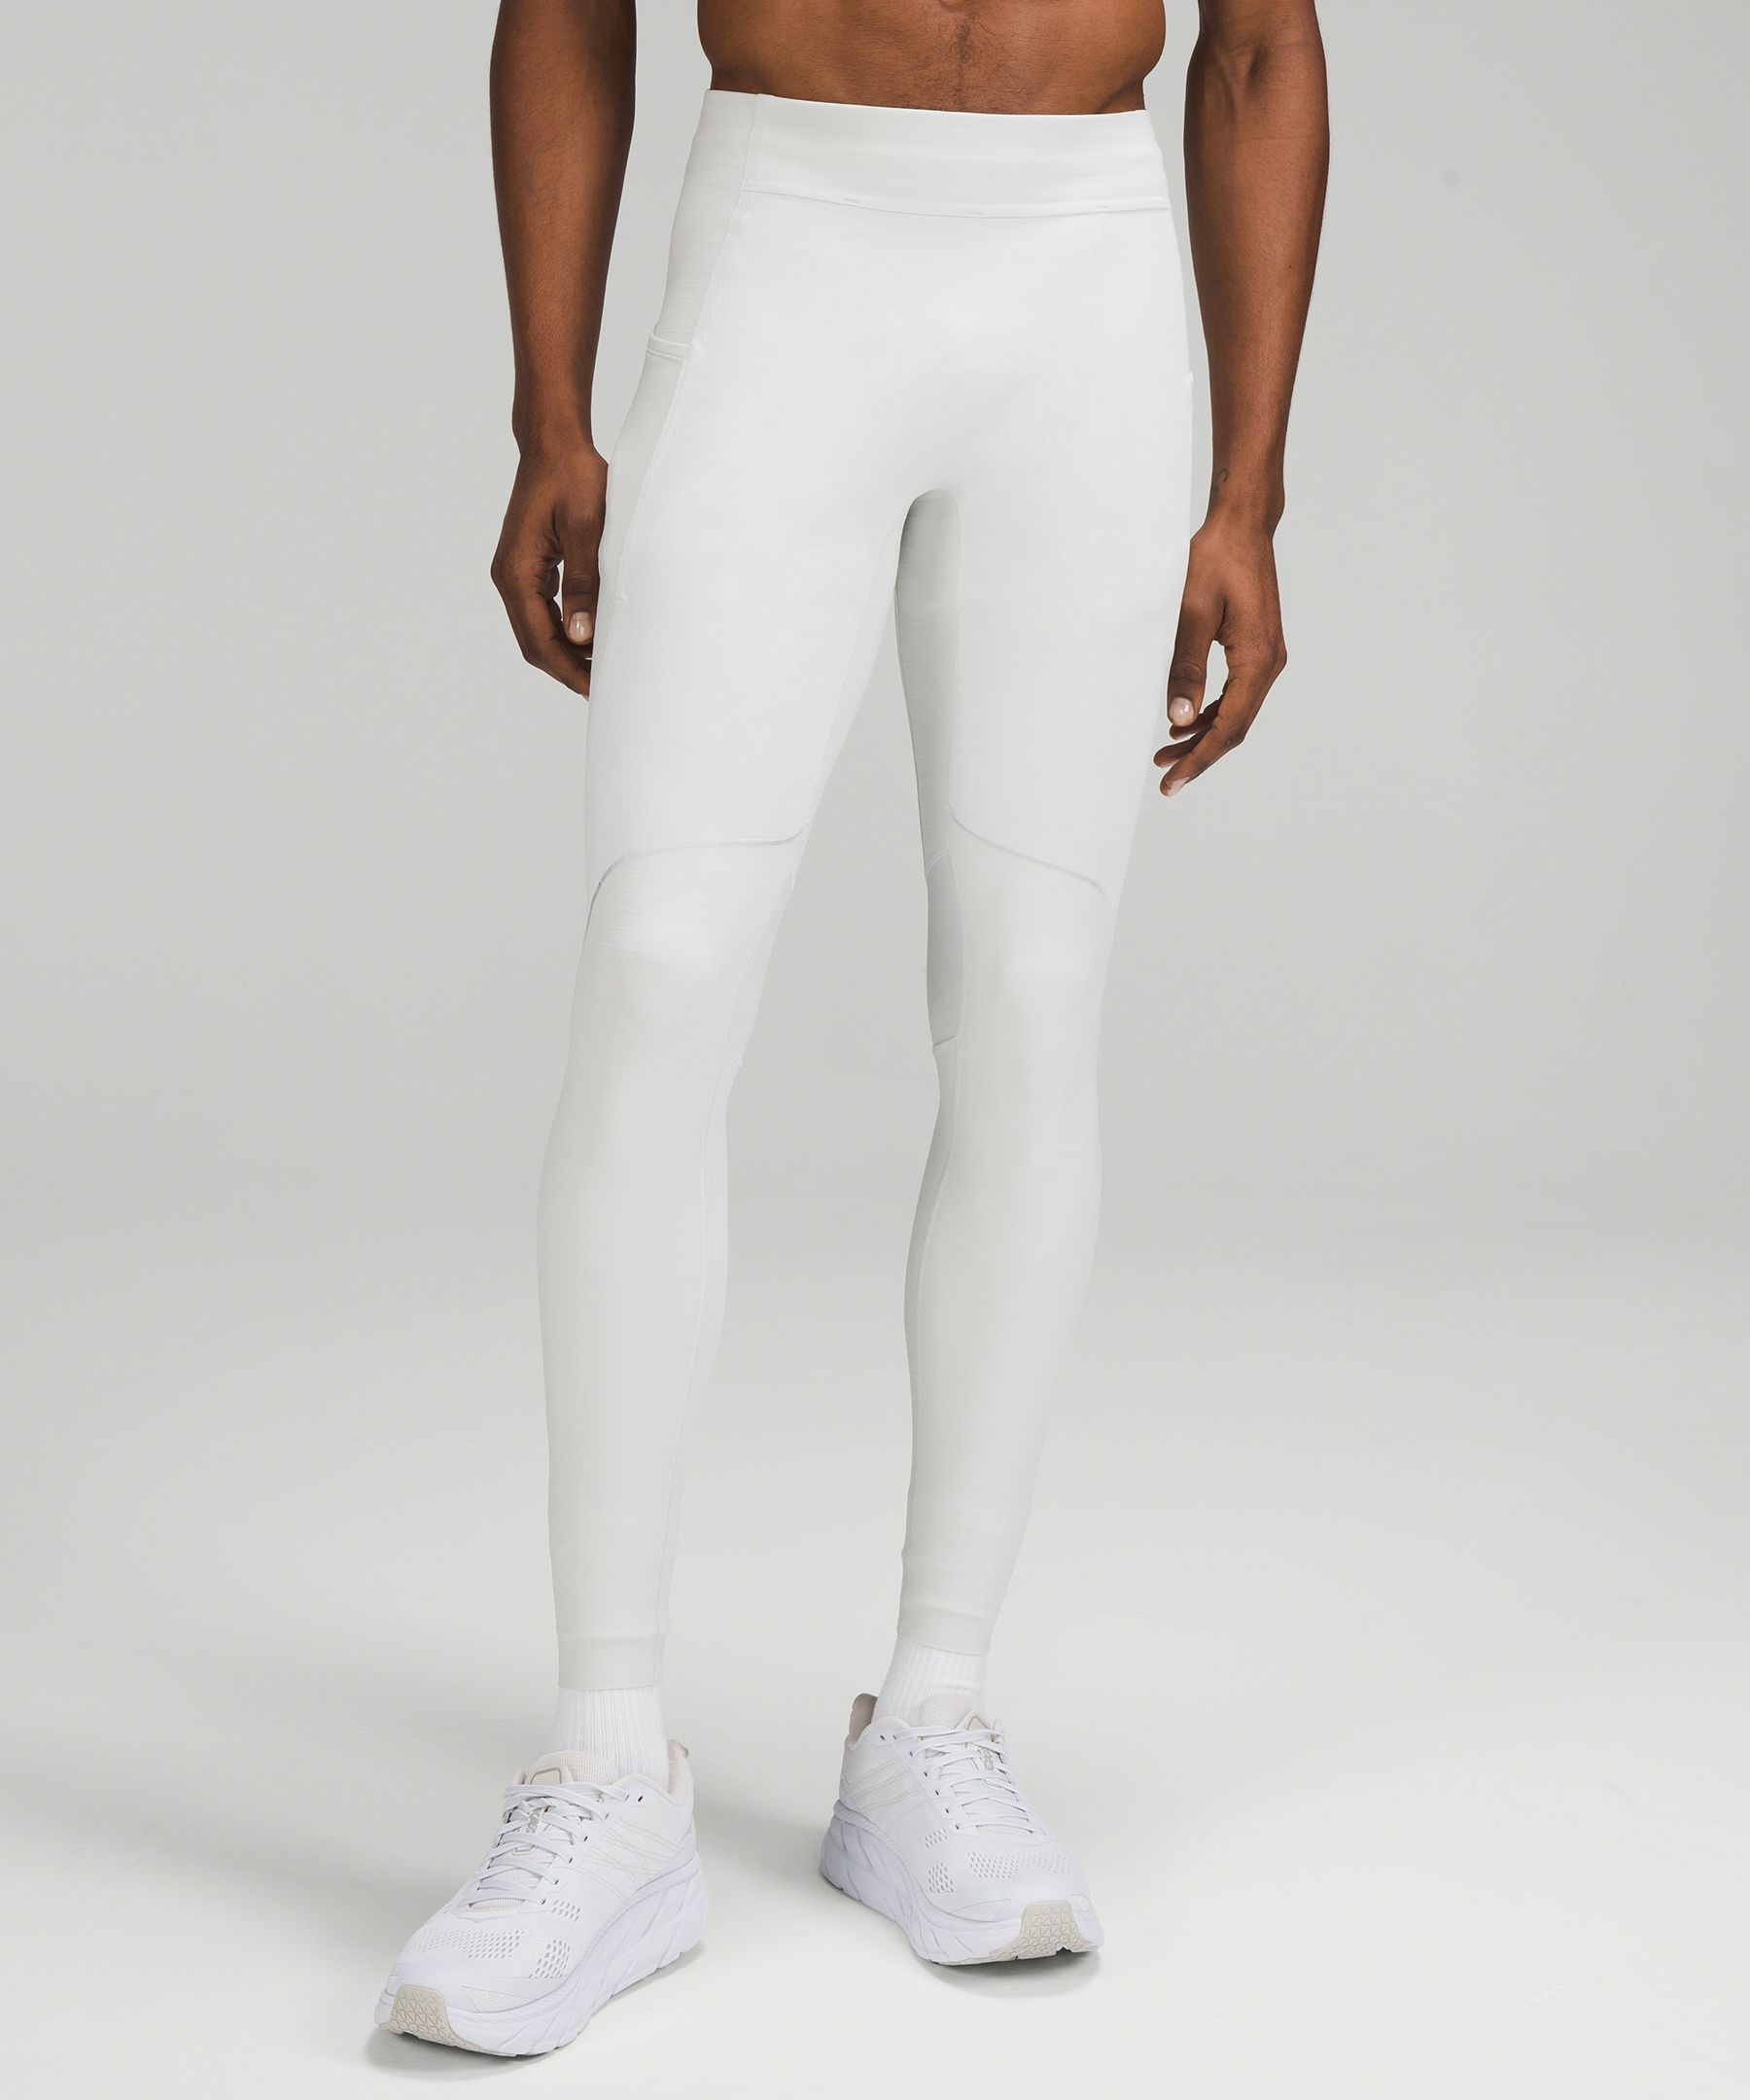 Lululemon Inspire Tight Size 8 - $40 - From Mac